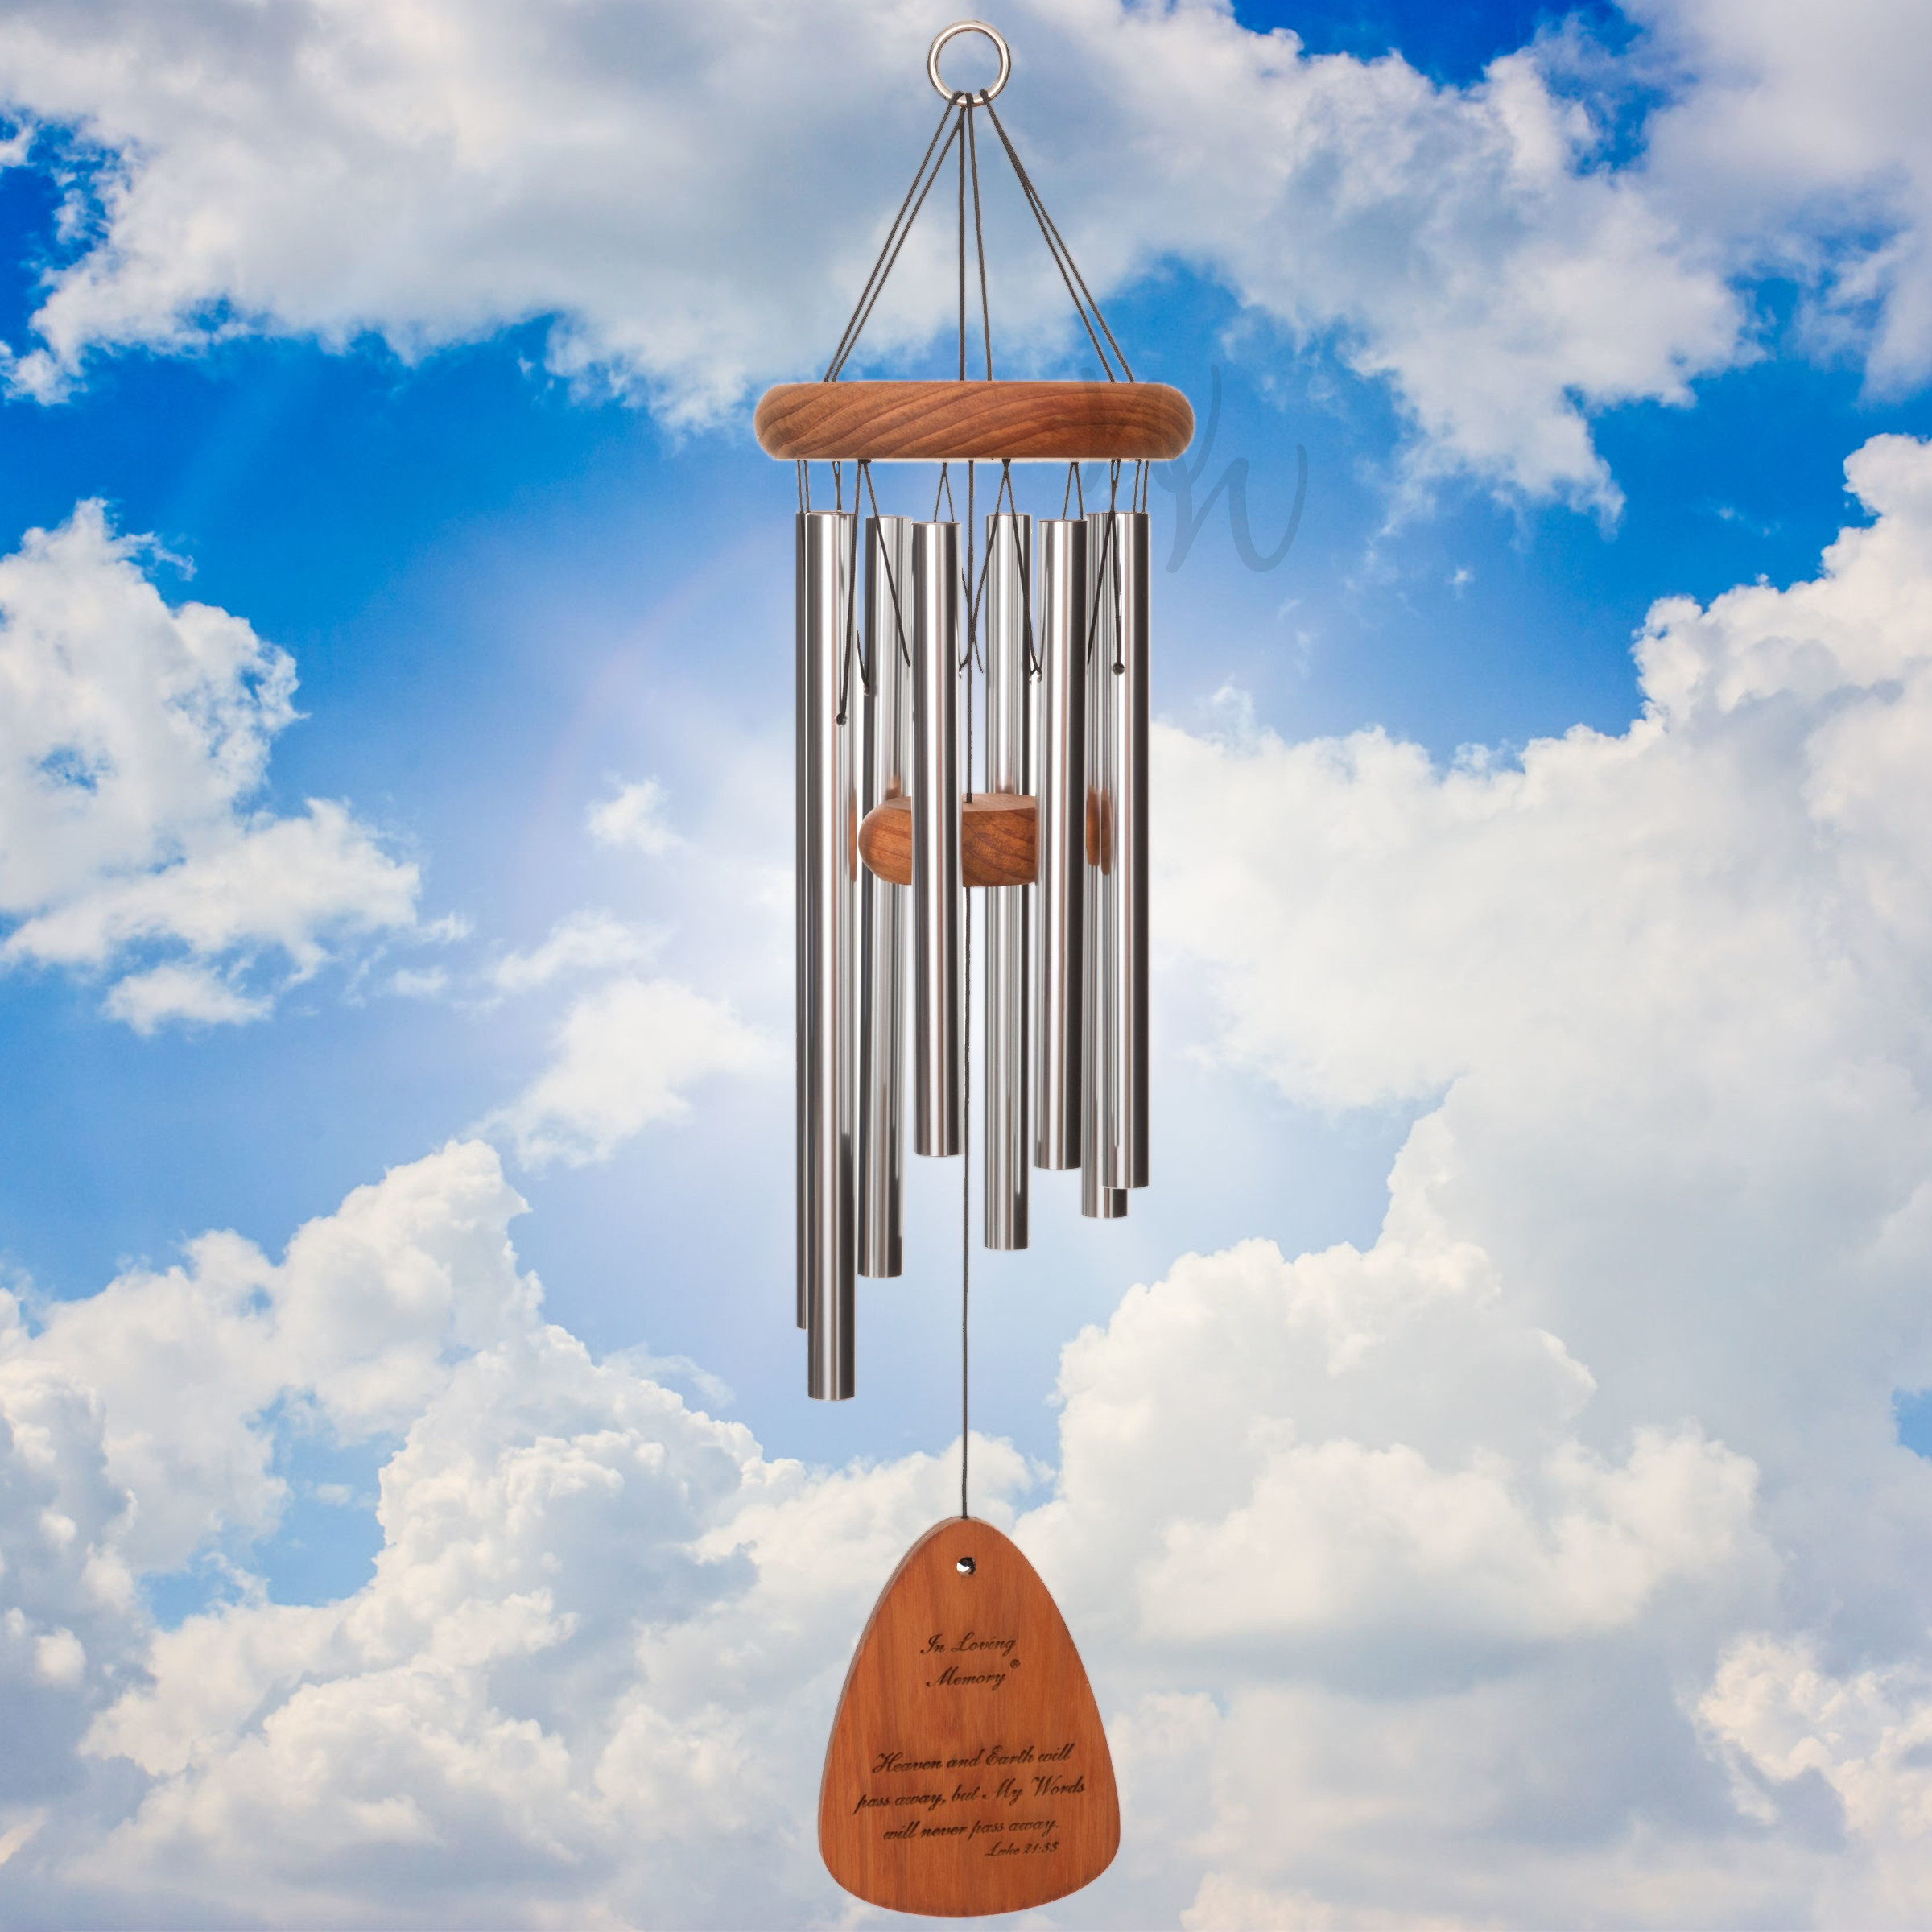 In Loving Memory 24 Inch Windchime - My Words will never pass away... in Silver